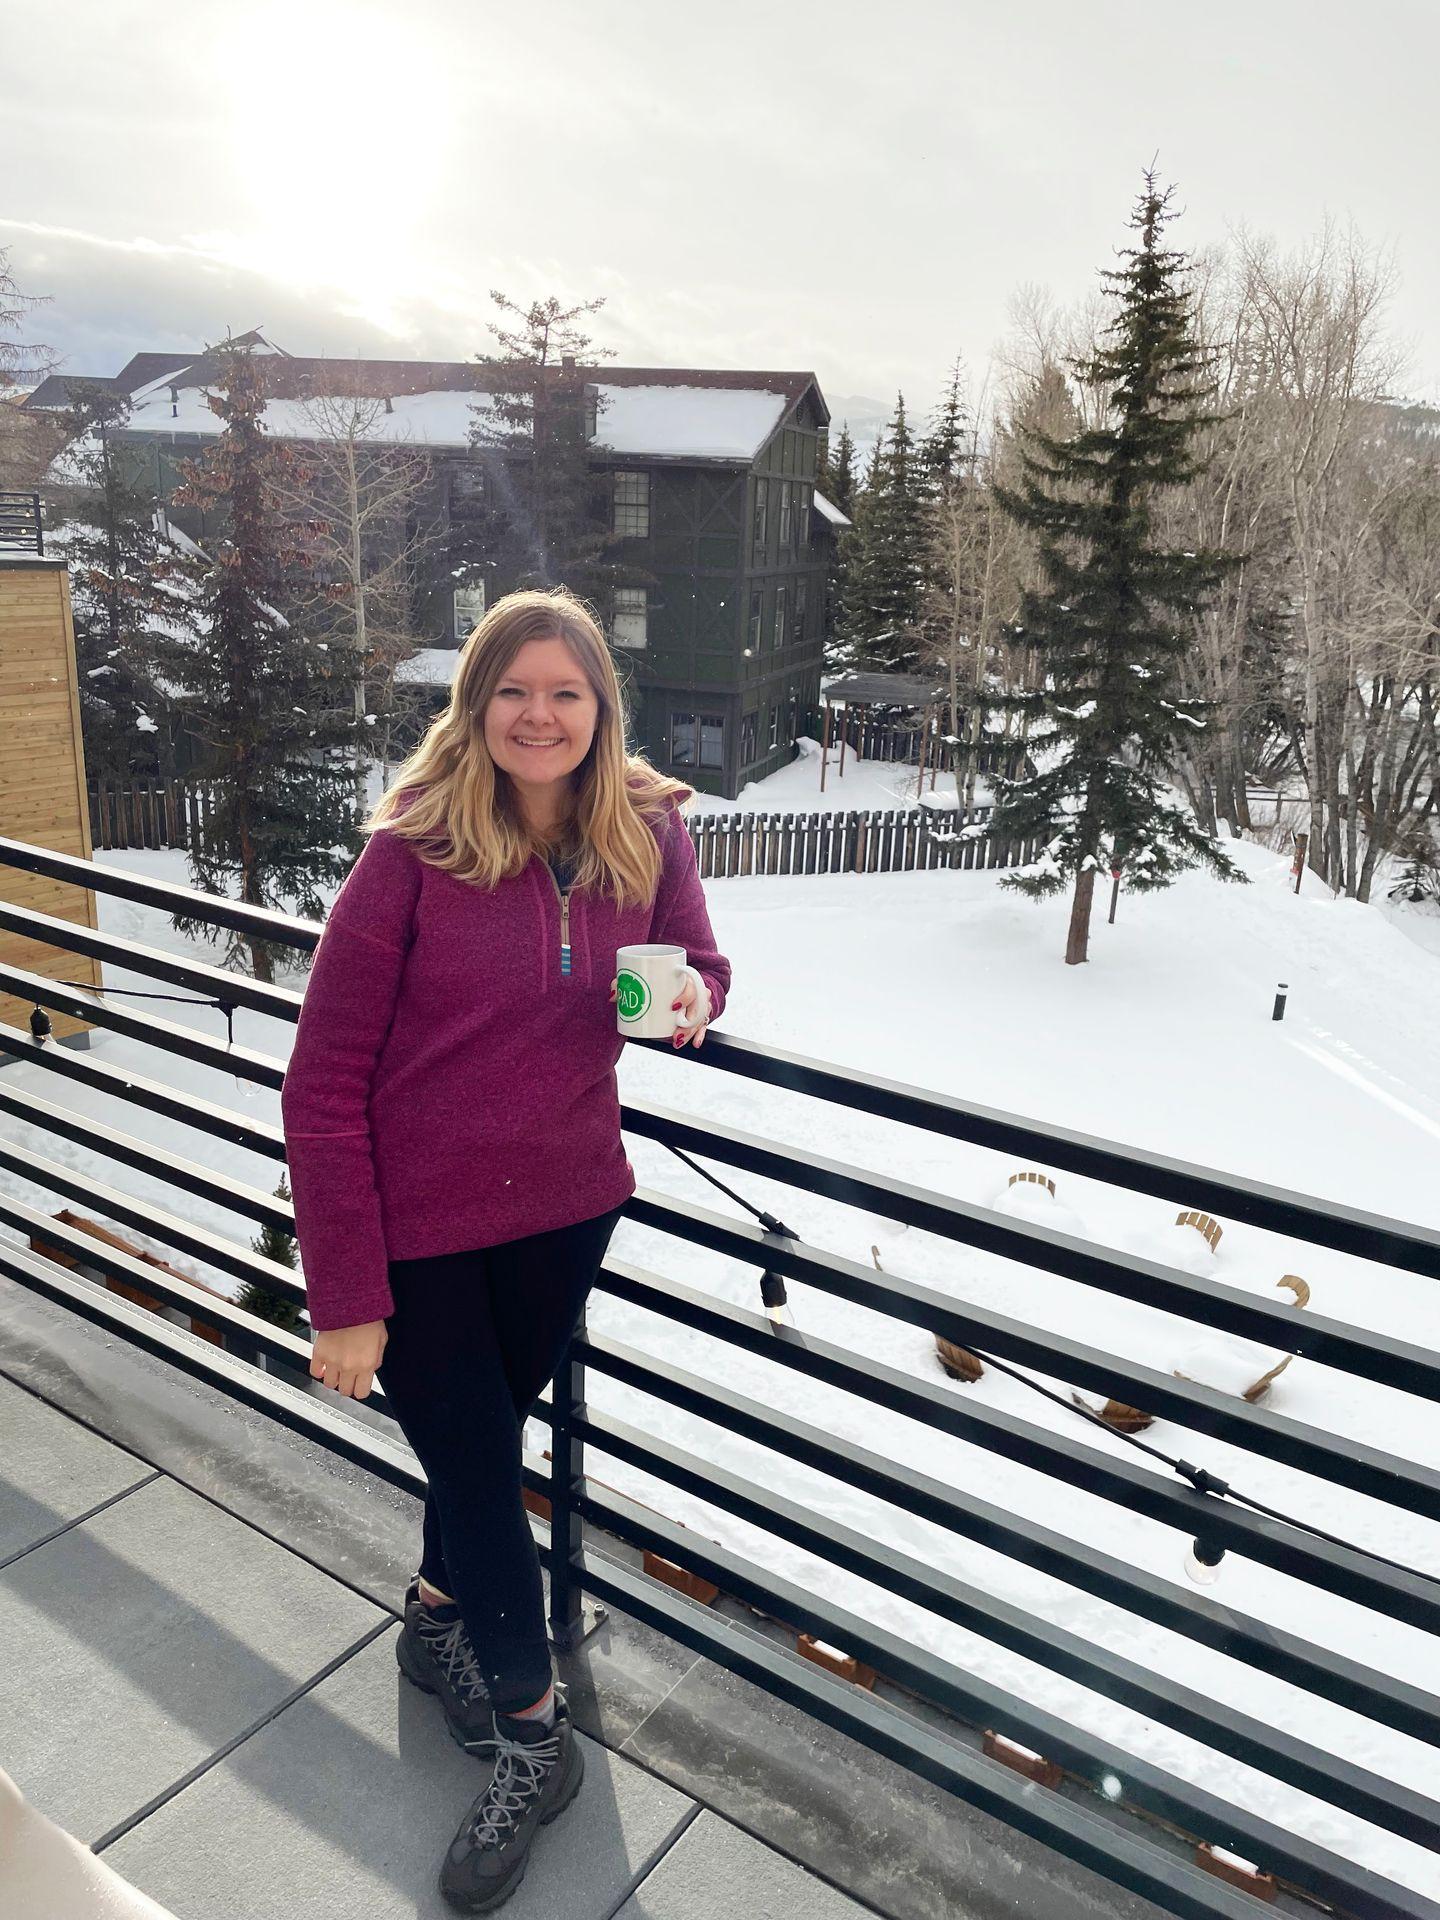 Lydia standing on the hot tub deck of The Pad holding a coffee mug, with snow on the ground in the background